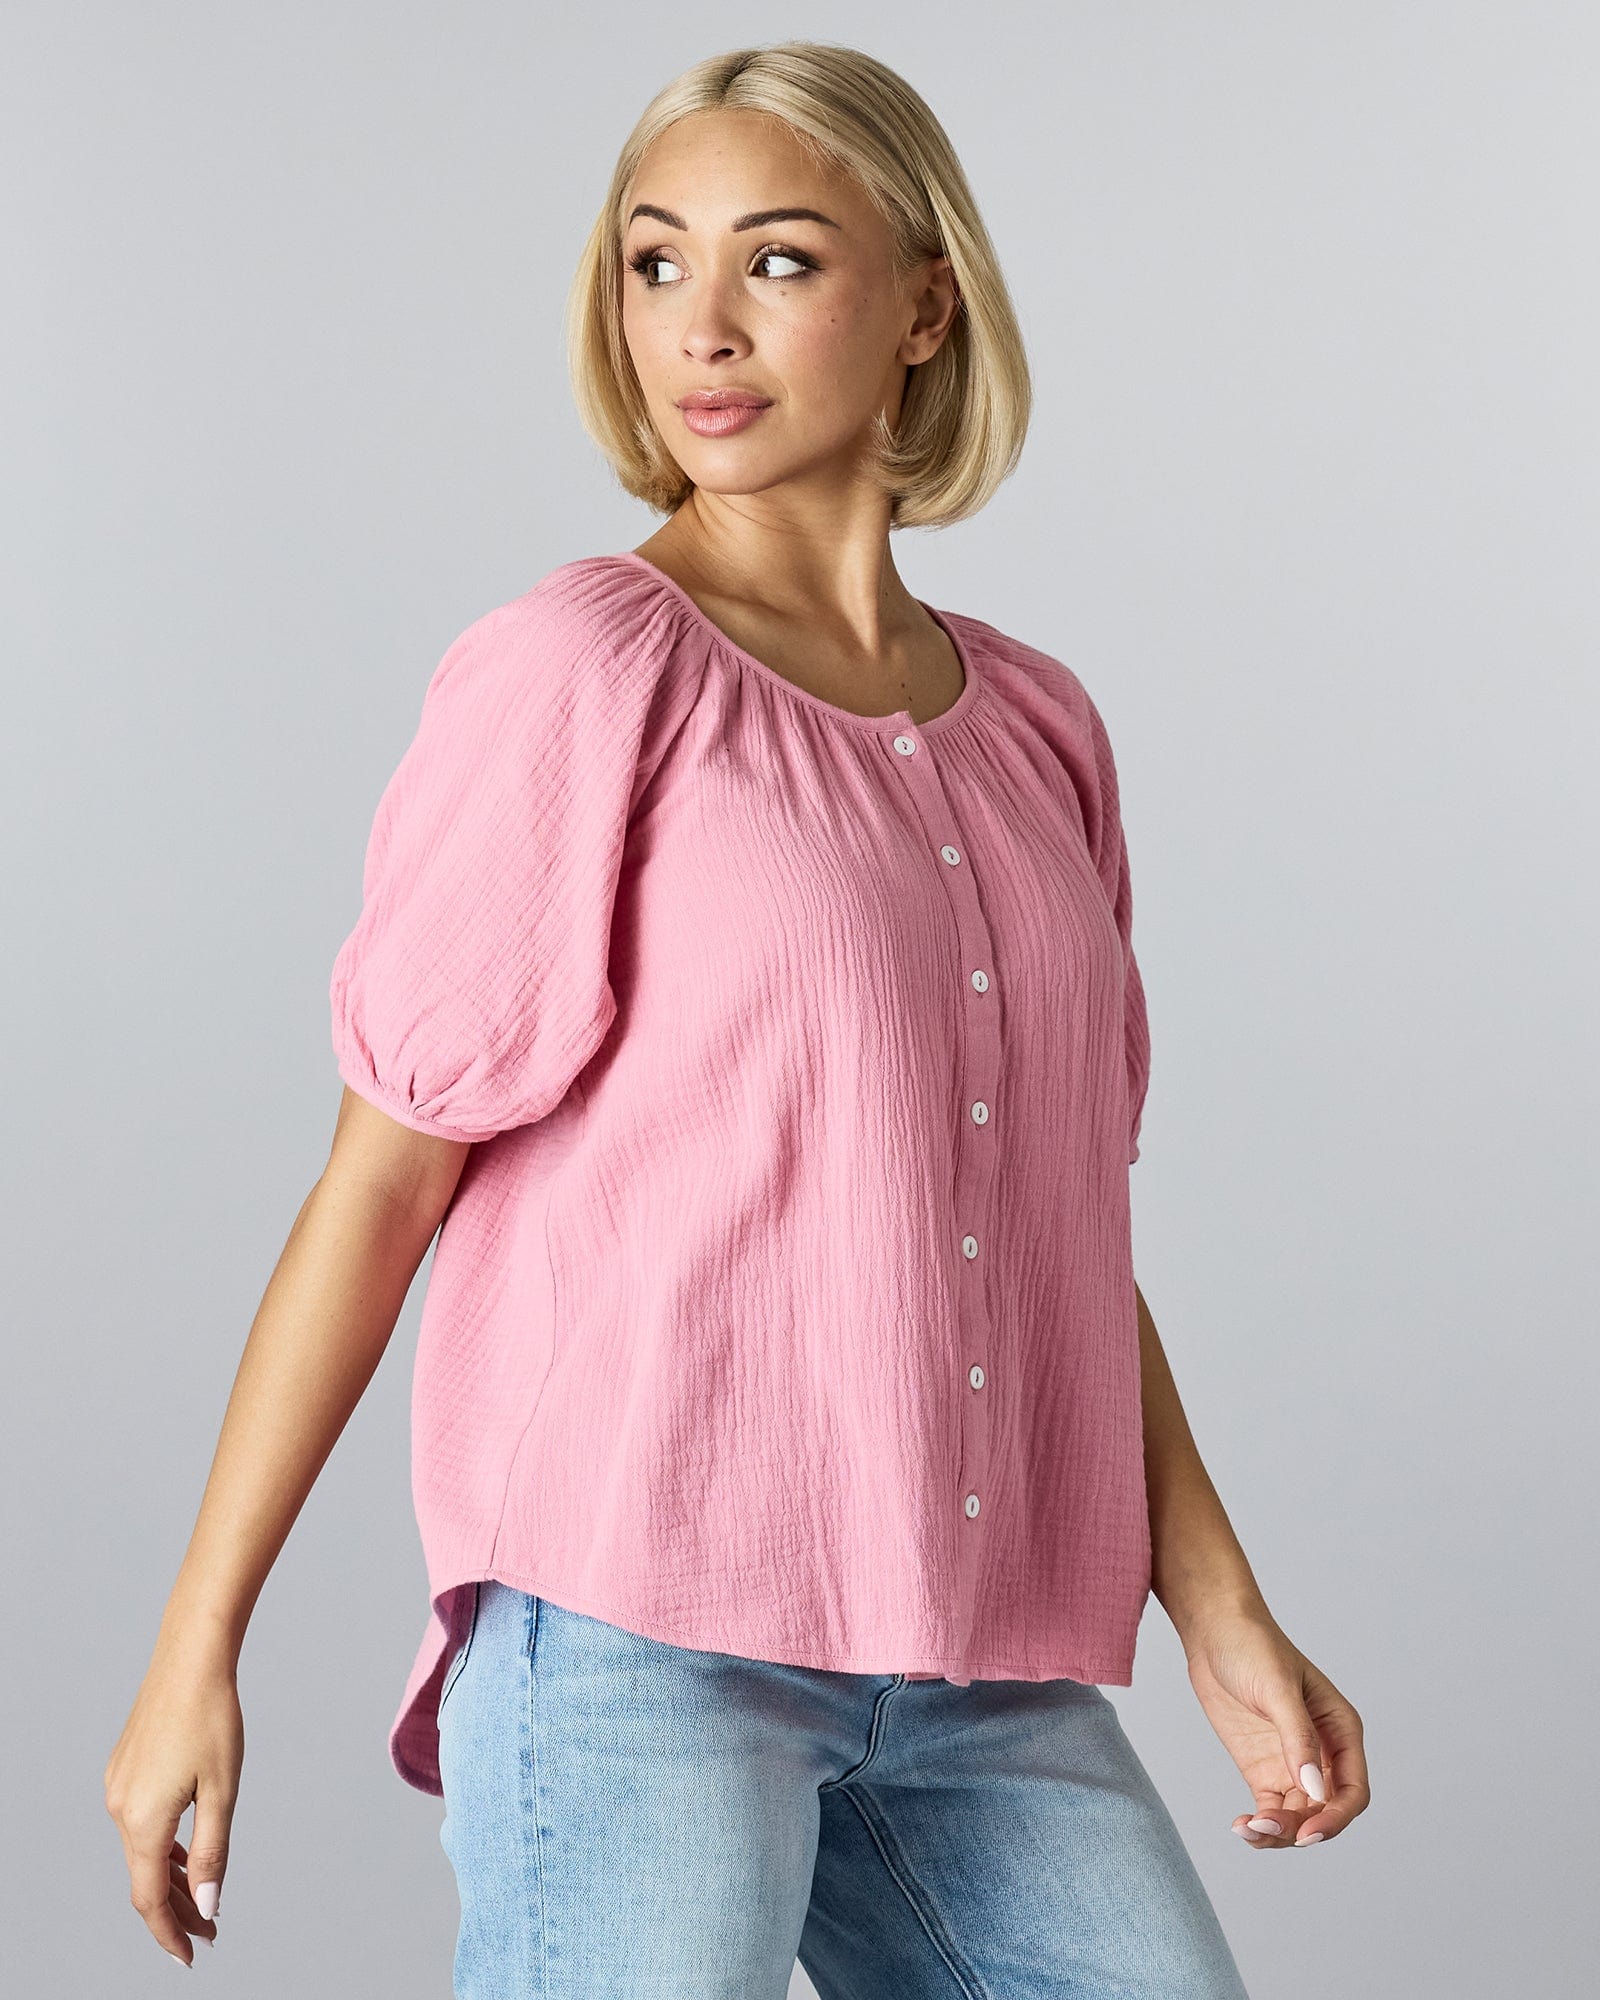 Woman in a short sleeved, pink blouse with buttons down the front and slight texturing of material